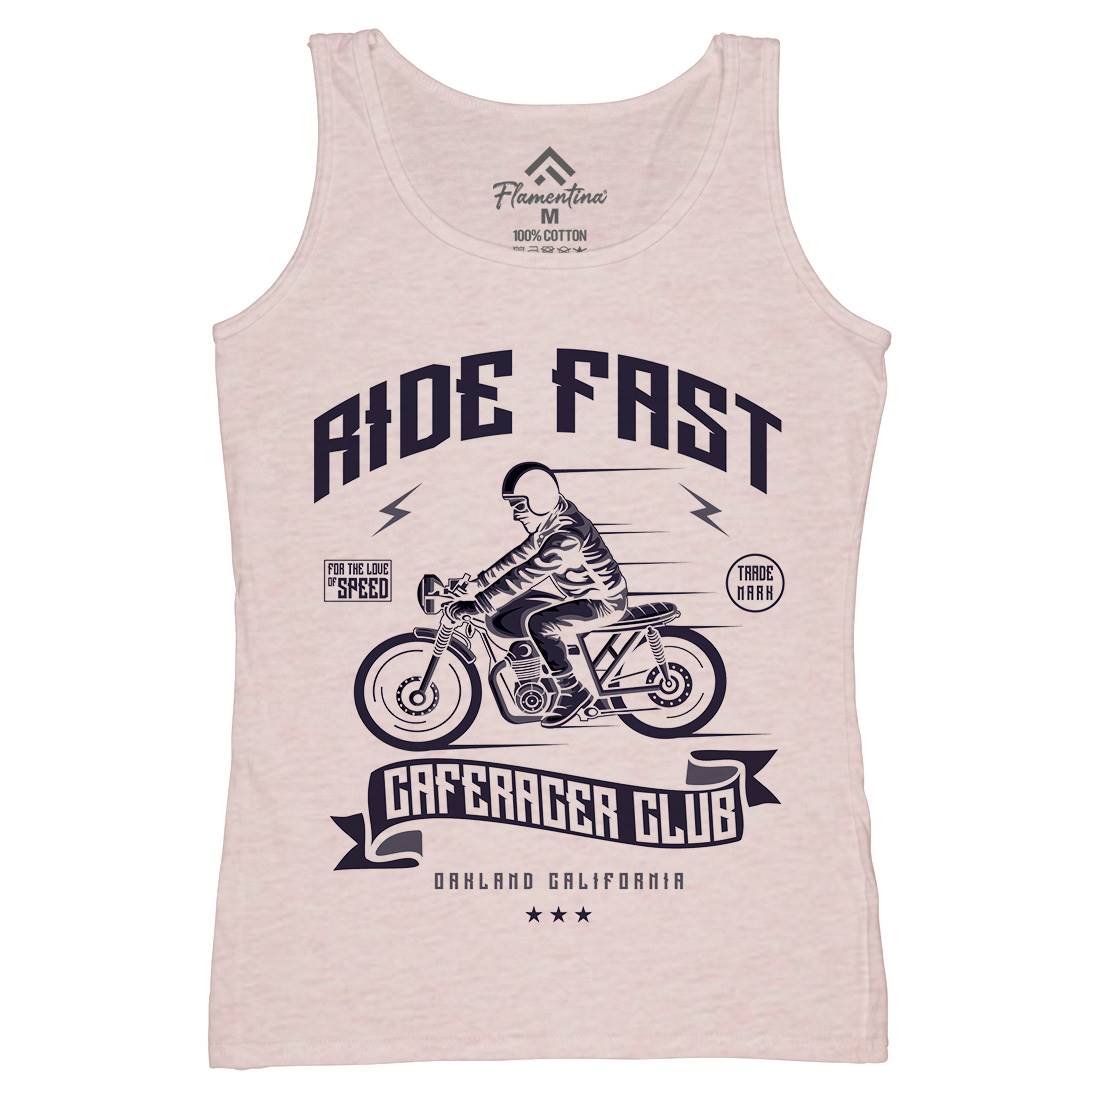 Ride Fast Womens Organic Tank Top Vest Motorcycles A117